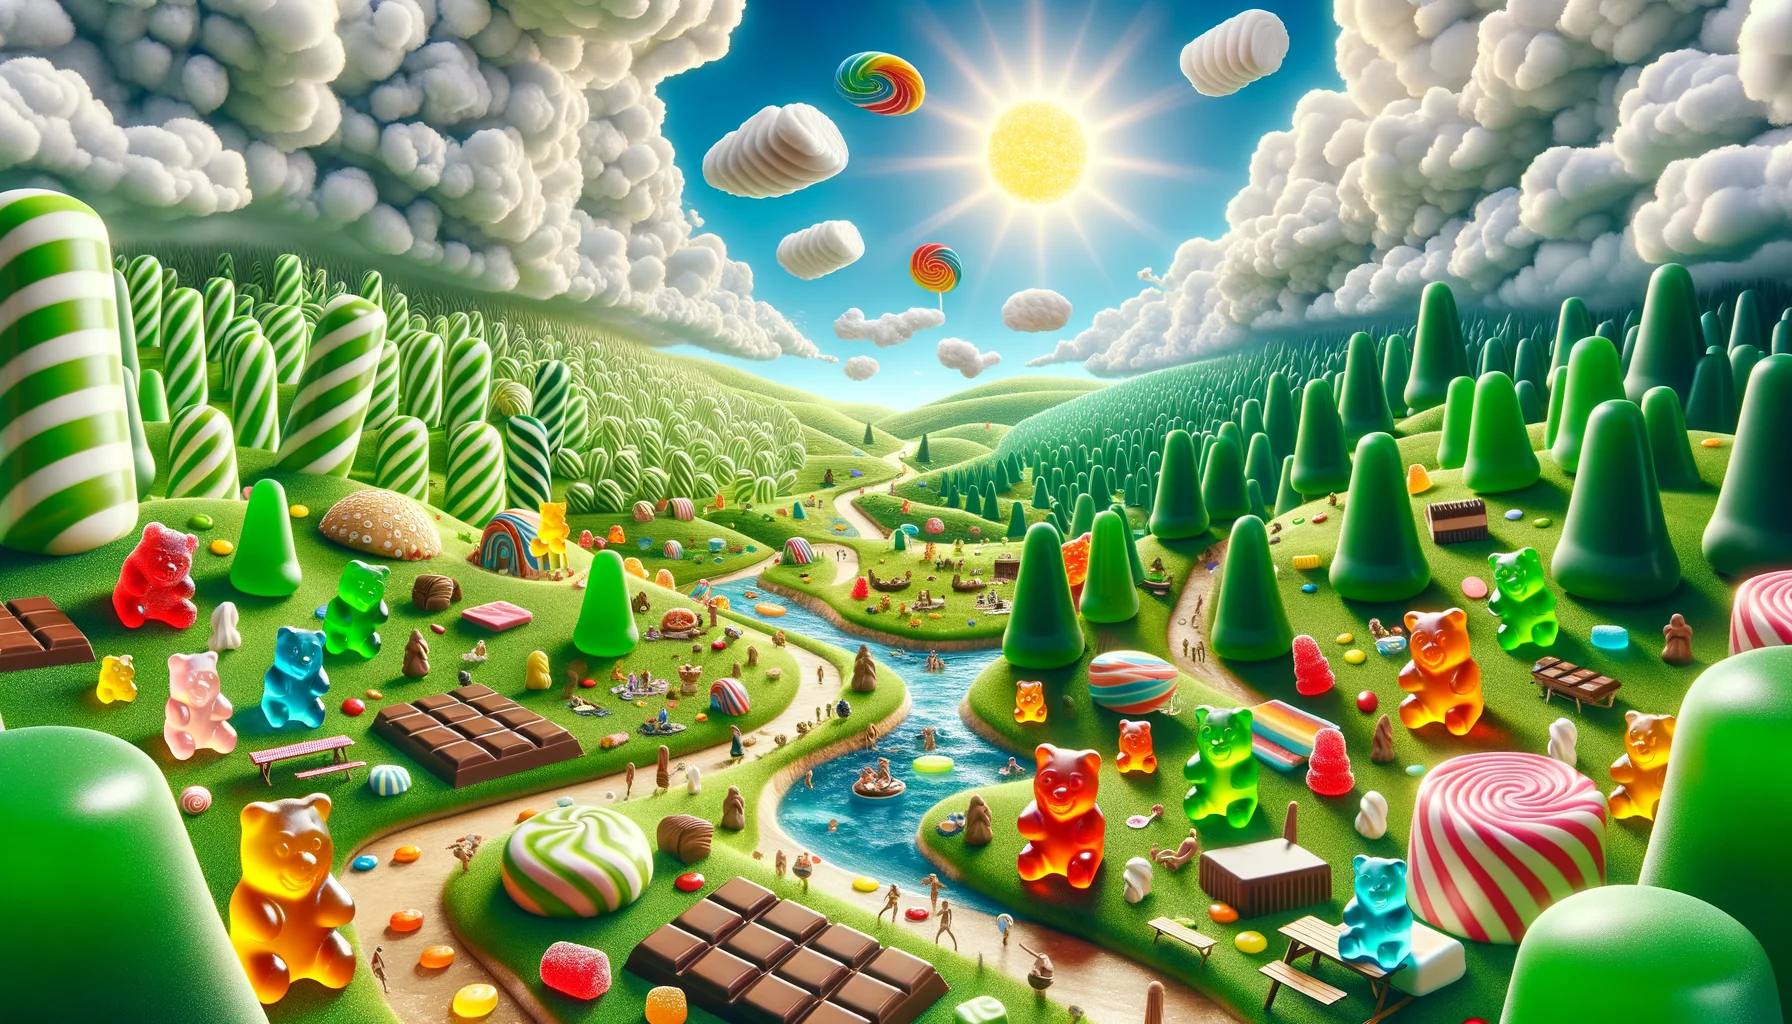 An amusing reality-based image showcasing a candy land. Imagine rolling hills made of green jelly candies with gumdrop trees scattered around. In the background, there is a chocolate river flowing throughout the landscape, under the marshmallow cloud-filled sky. The inhabitants of this land are comical human-like gummy bears of multiple colors and various sizes. They are seen engaging in different fun-filled activities such as playing games, having picnics, or just lounging around, convincingly immersed in their idyllic candy landscape. The perfection of the scenario is emphasized by the bright sun made of a radiant yellow starburst candy in the sky.